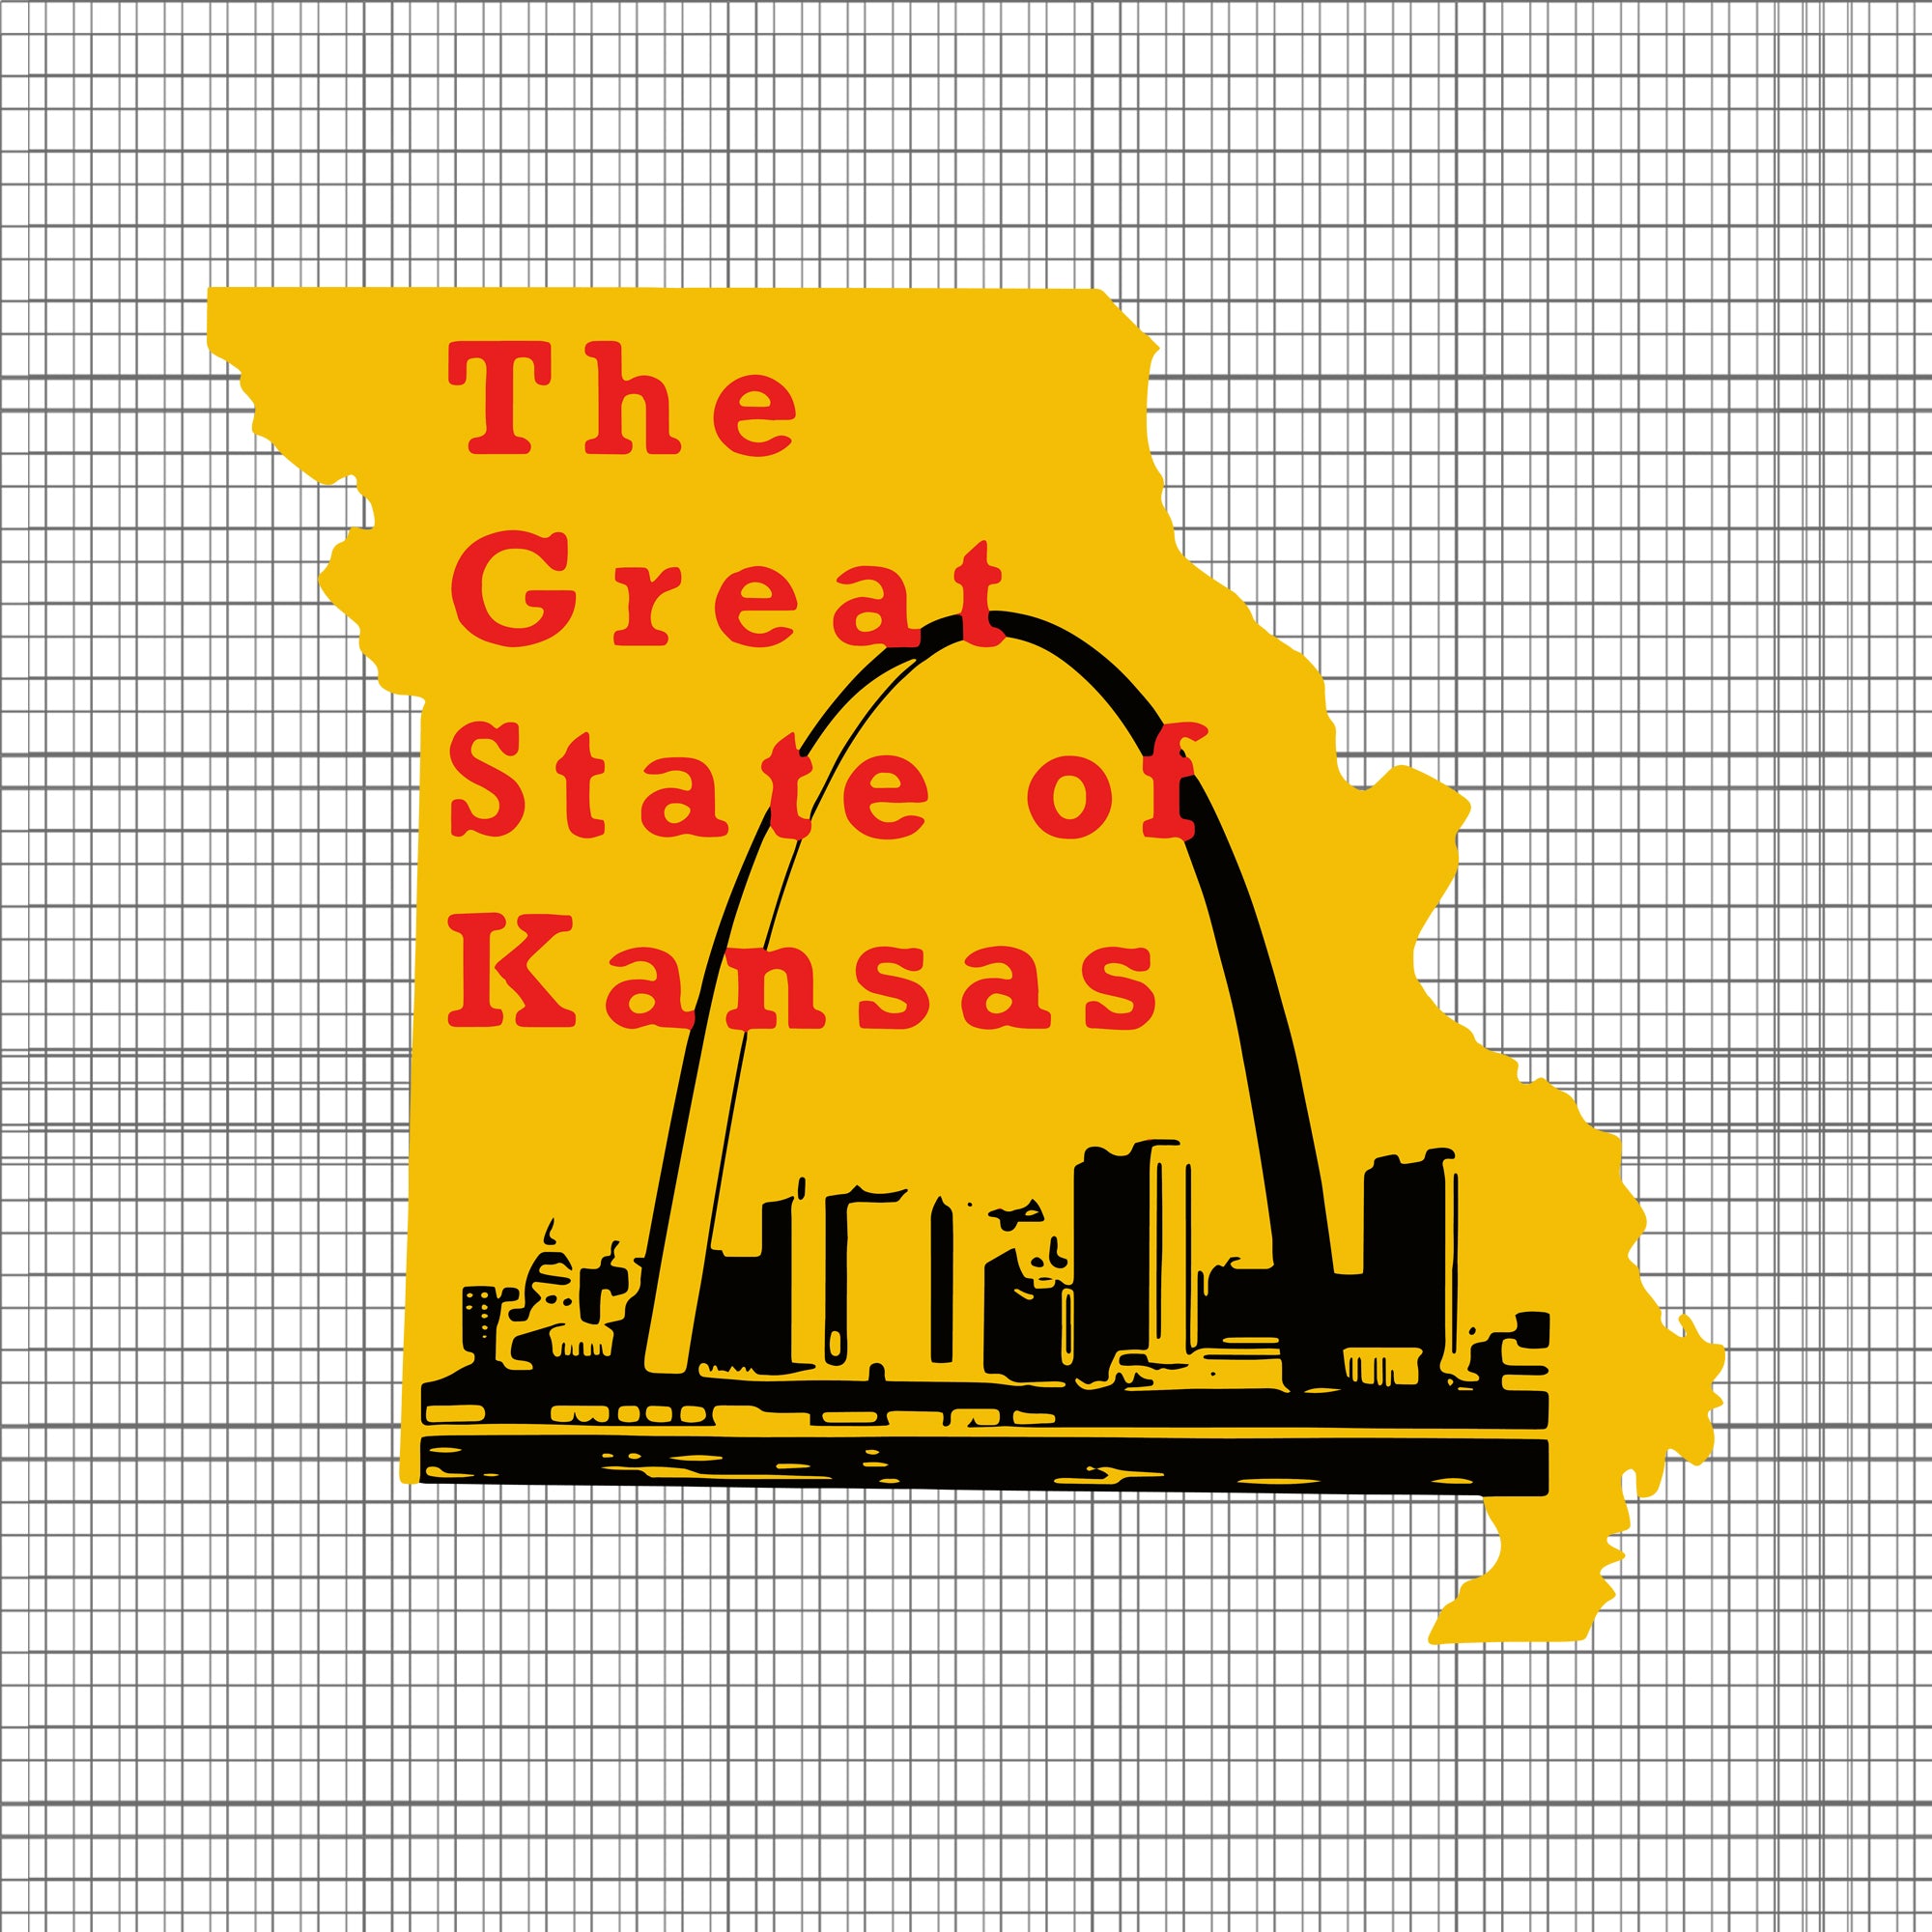 The great state of kansas svg, the great state of kansas png, the great state of kansas, the great state of kansas